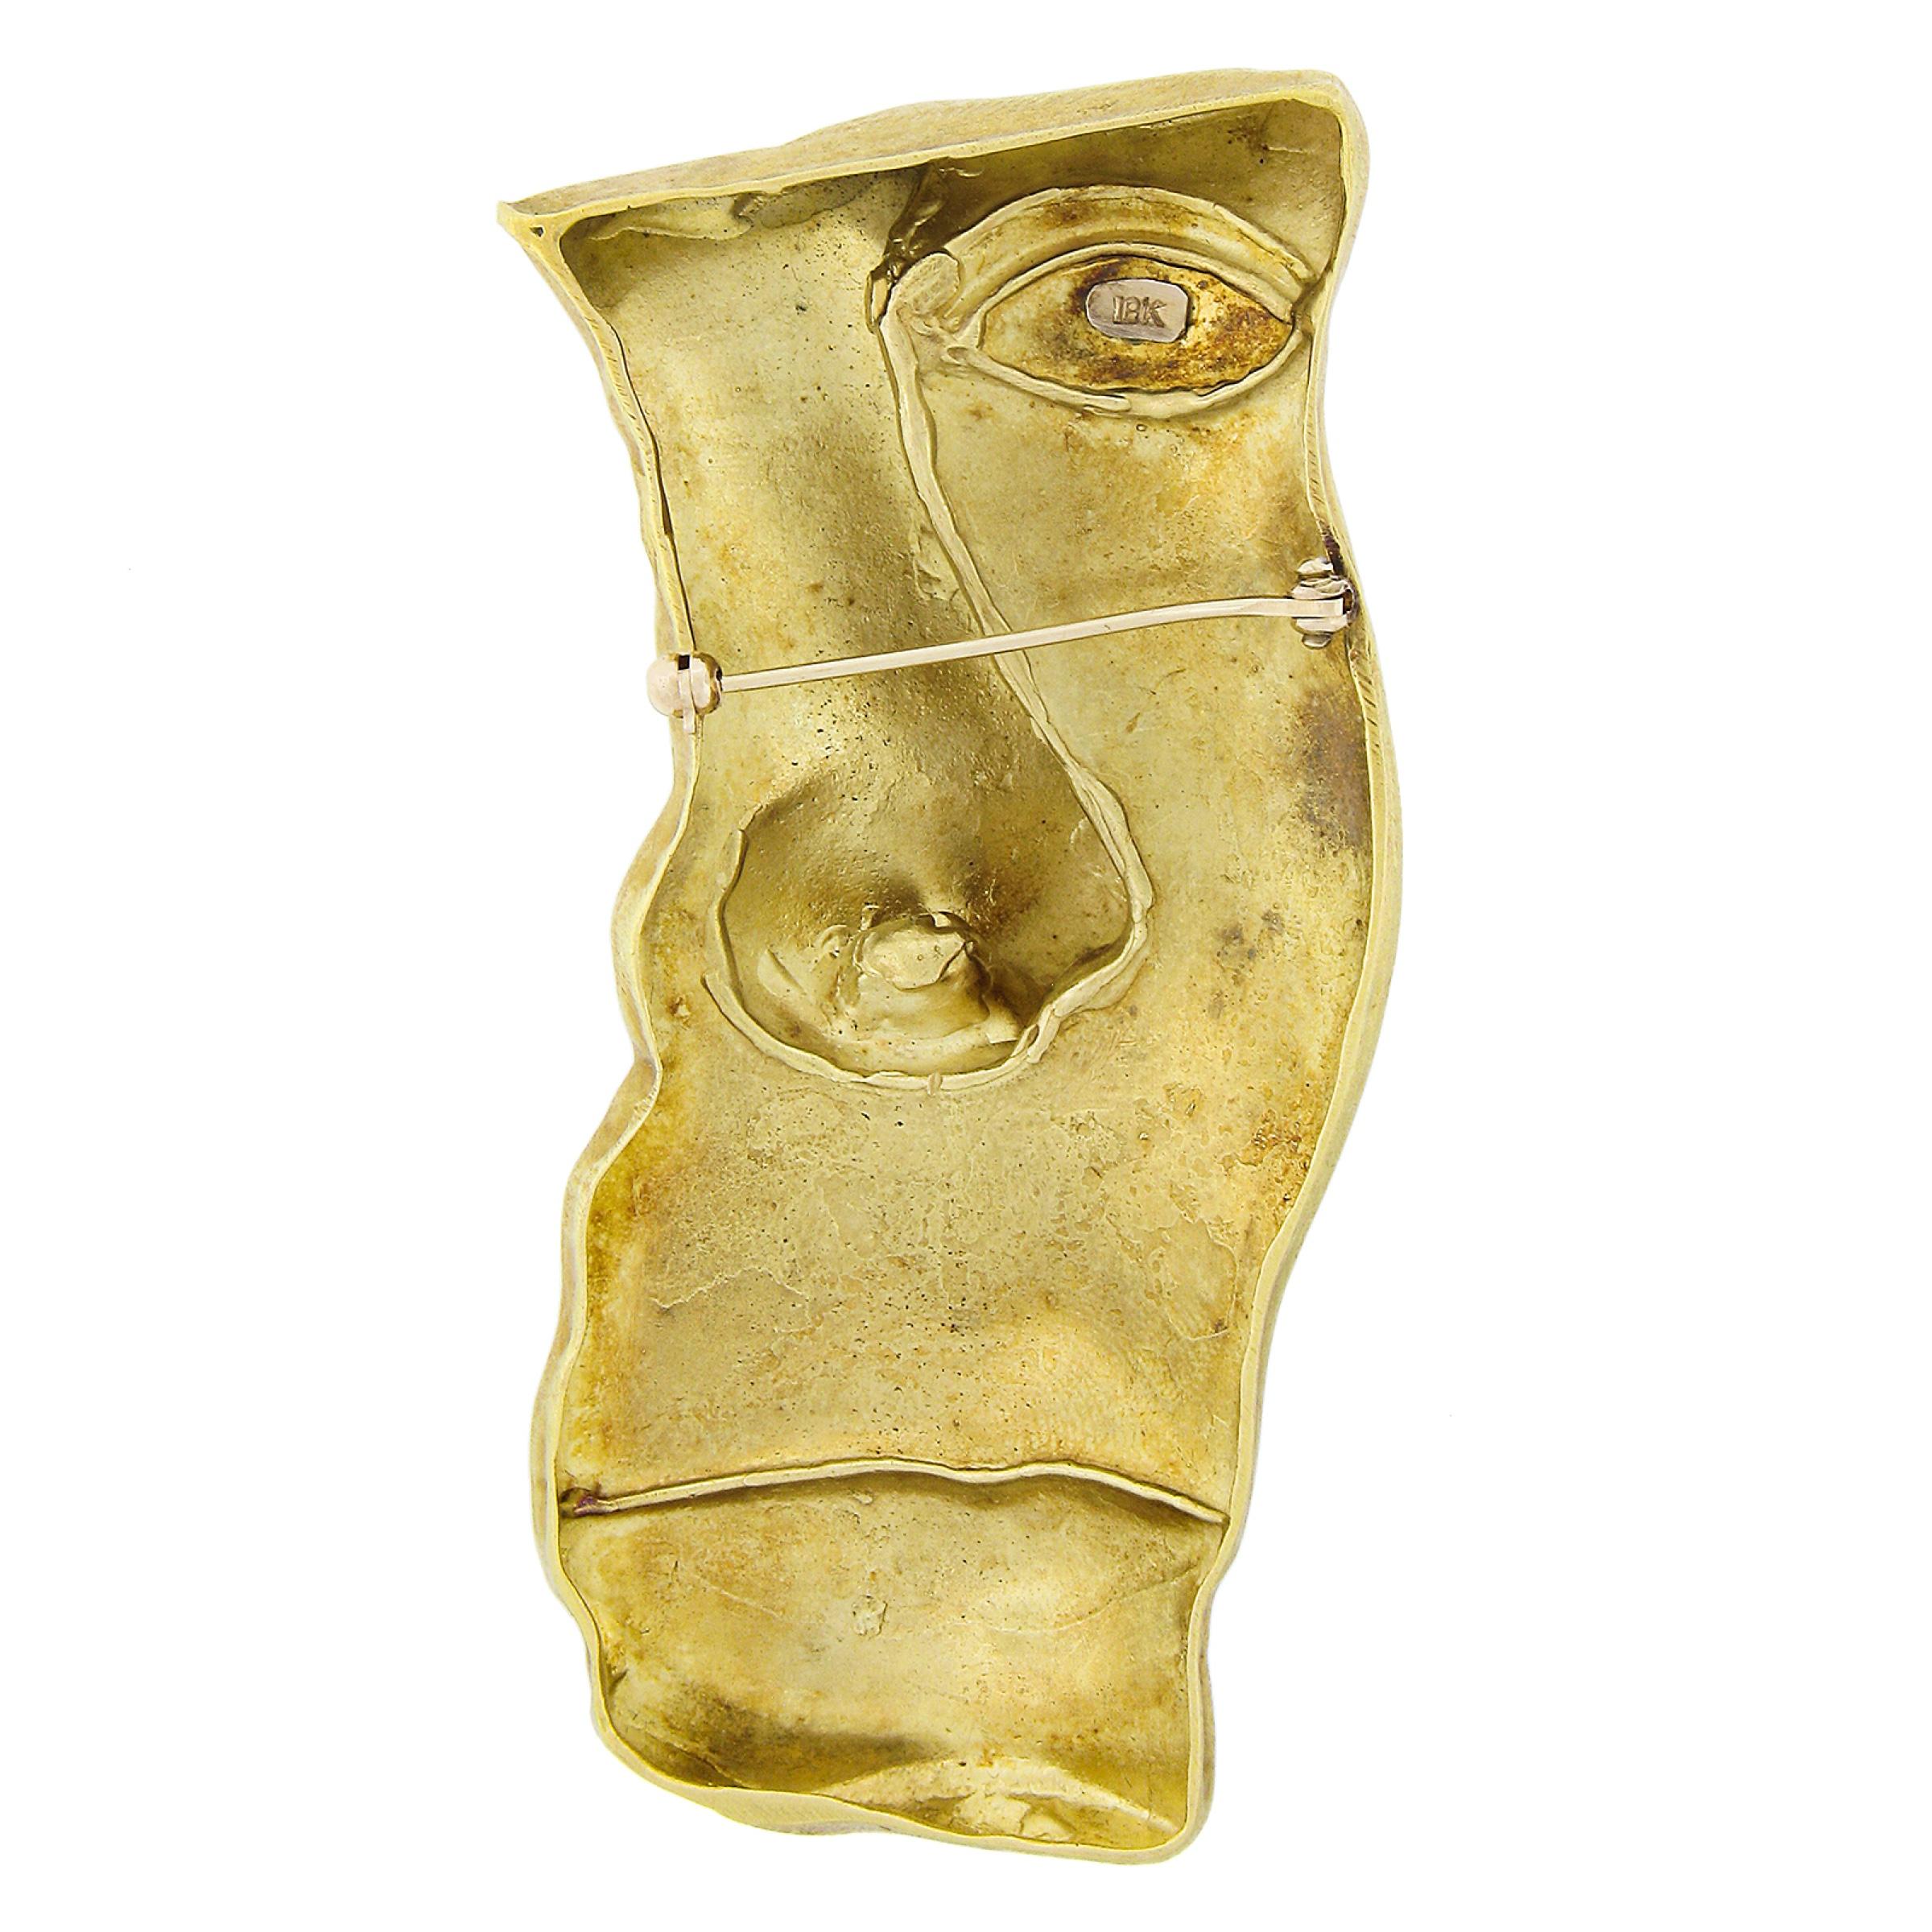 Material: Solid 18k Yellow Gold
Weight: 29.38 Grams
Height: 79.3mm (3.1